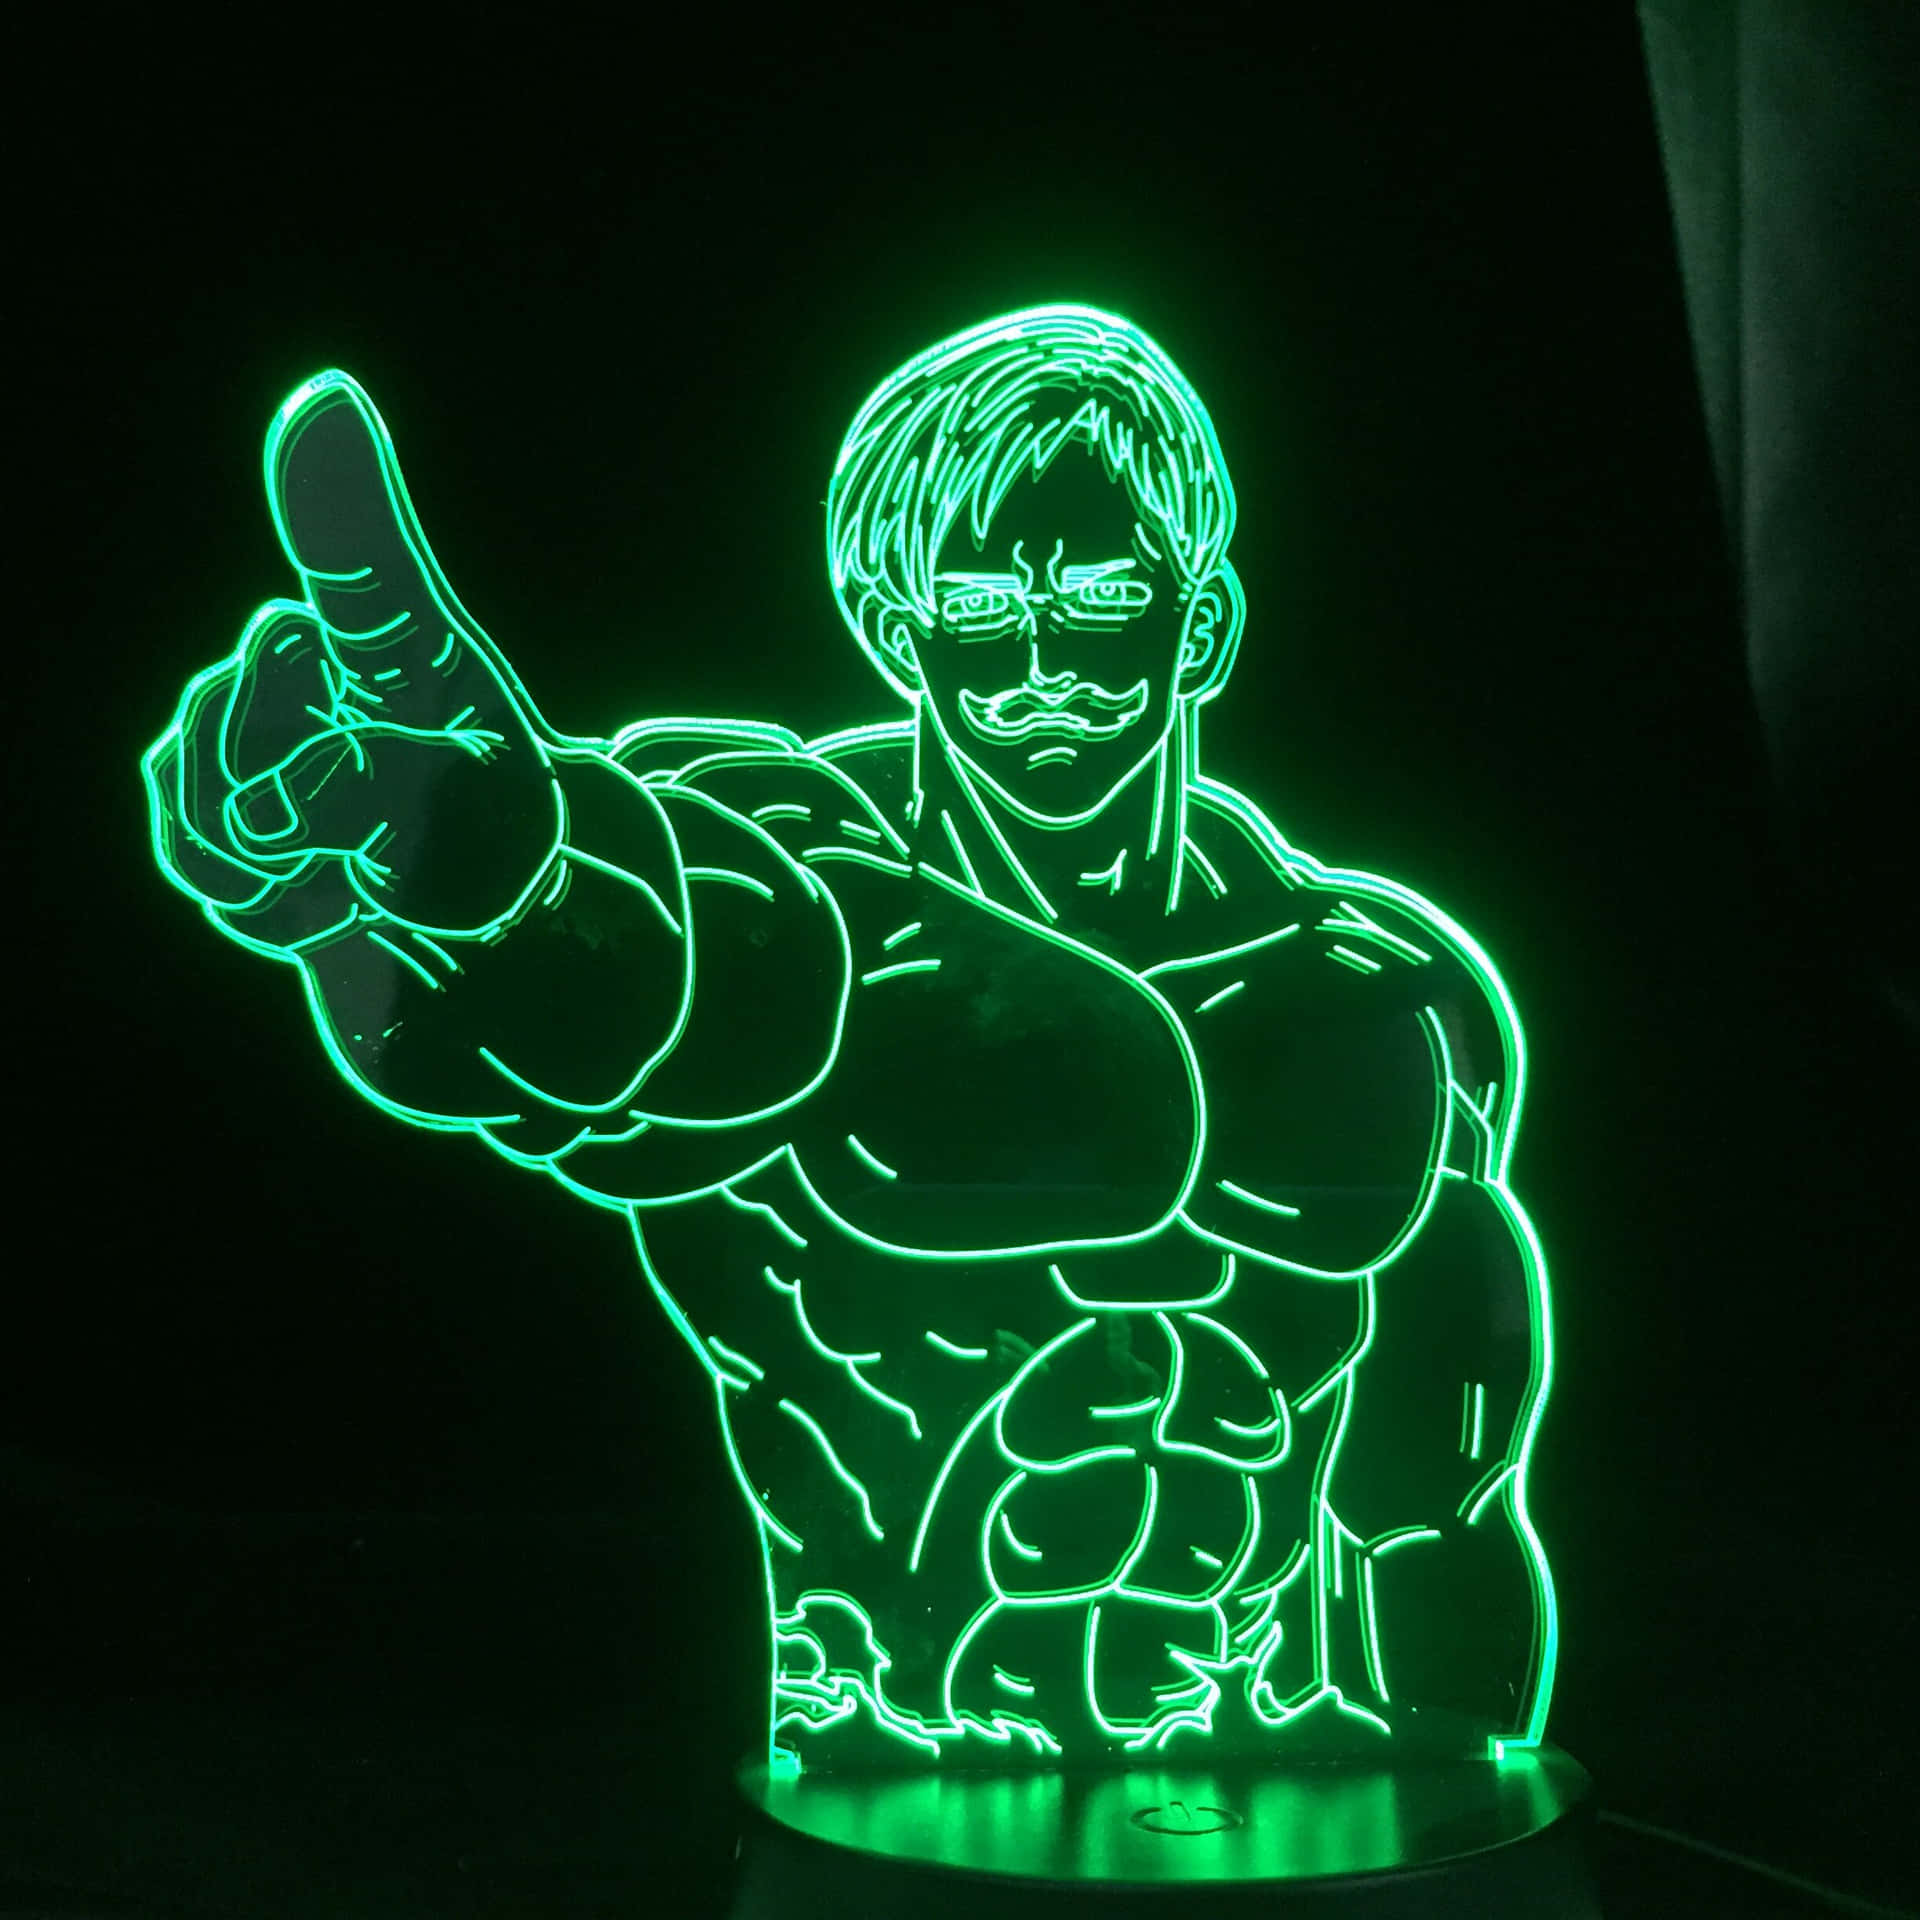 A Green Led Light With A Man In The Middle